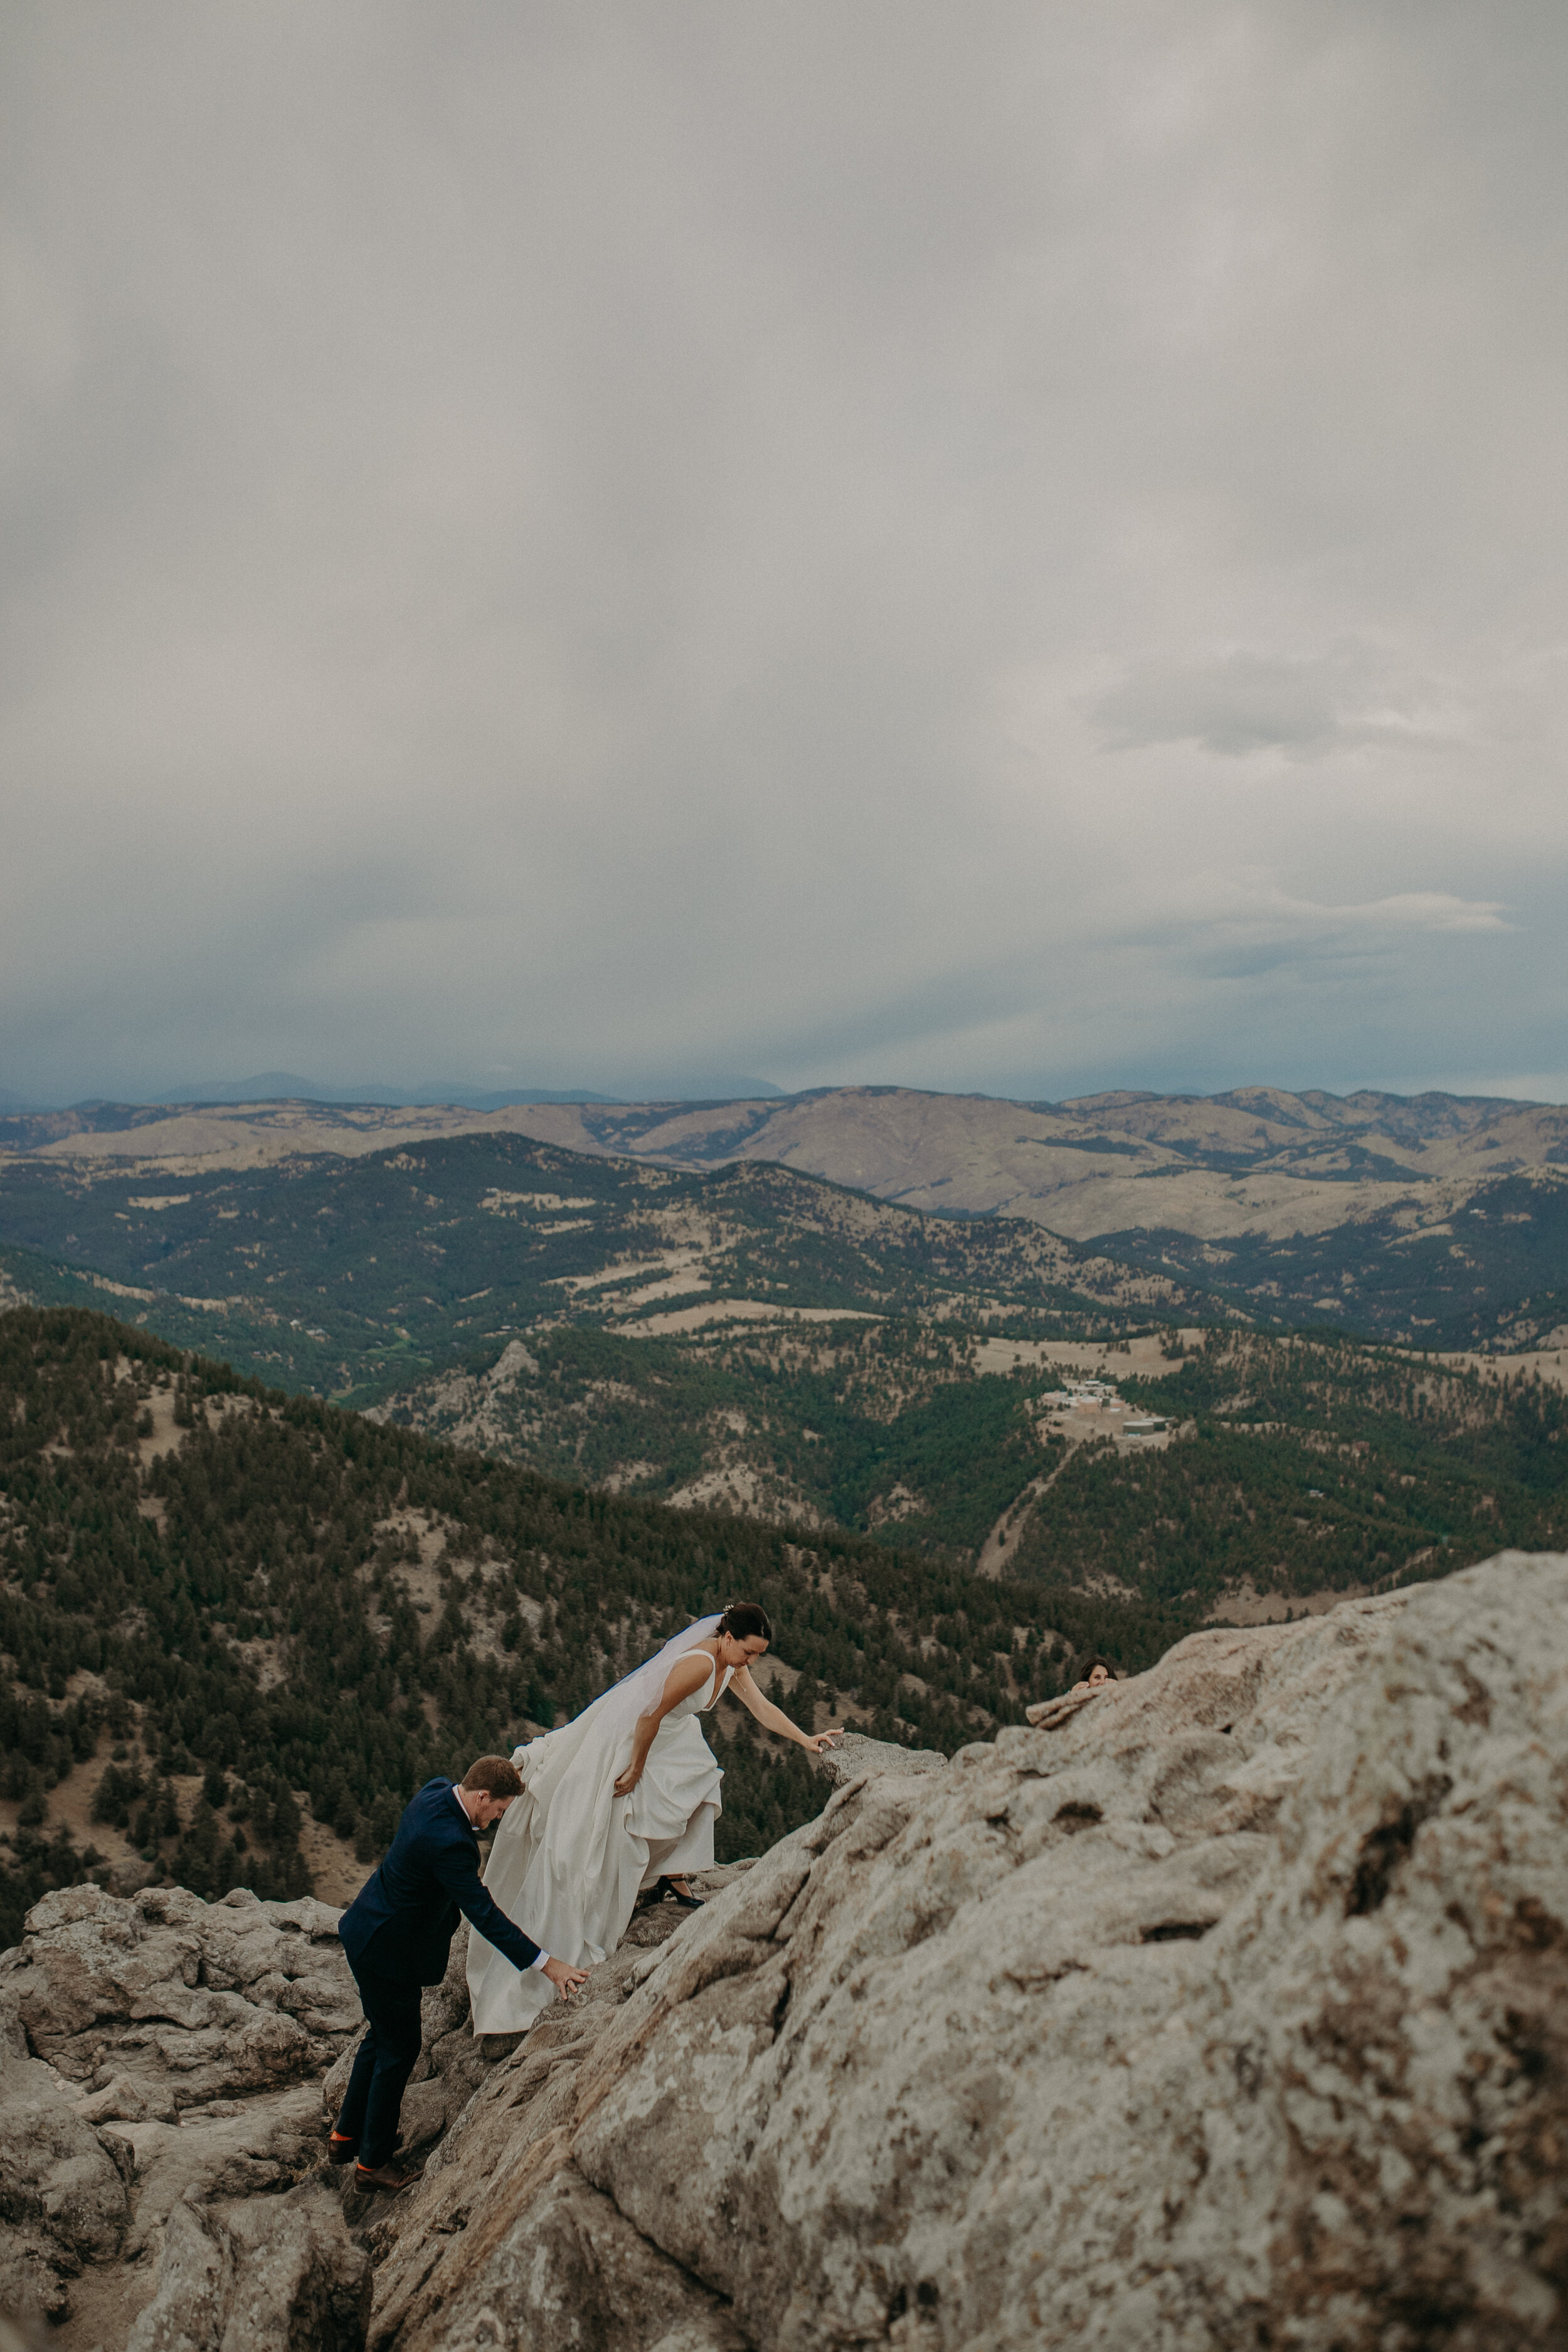  destination and adventurous elopement photographer Andrea Wagner travels with couples to their epic wedding destinations #bouldercoelopement #elopetocolorado #elopementphotographer #coloradoweddingphotographer #coloradoelopementphotographer #sunrise